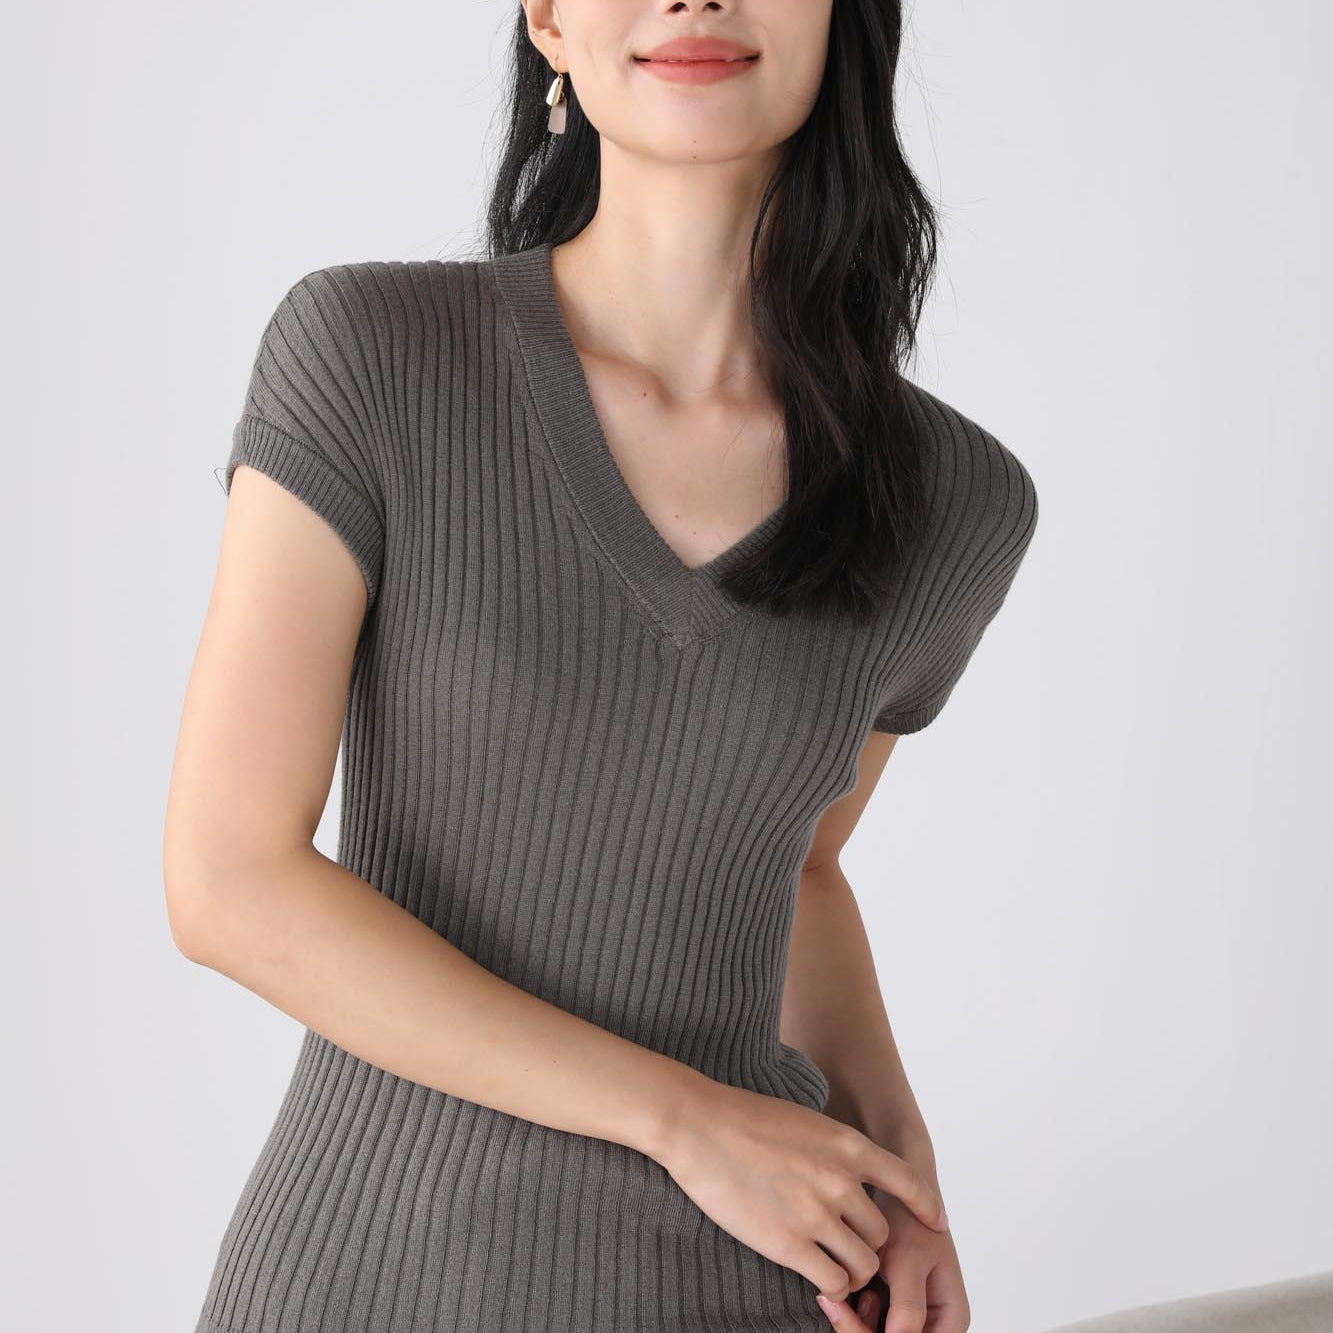 Evie jersey gray knit top